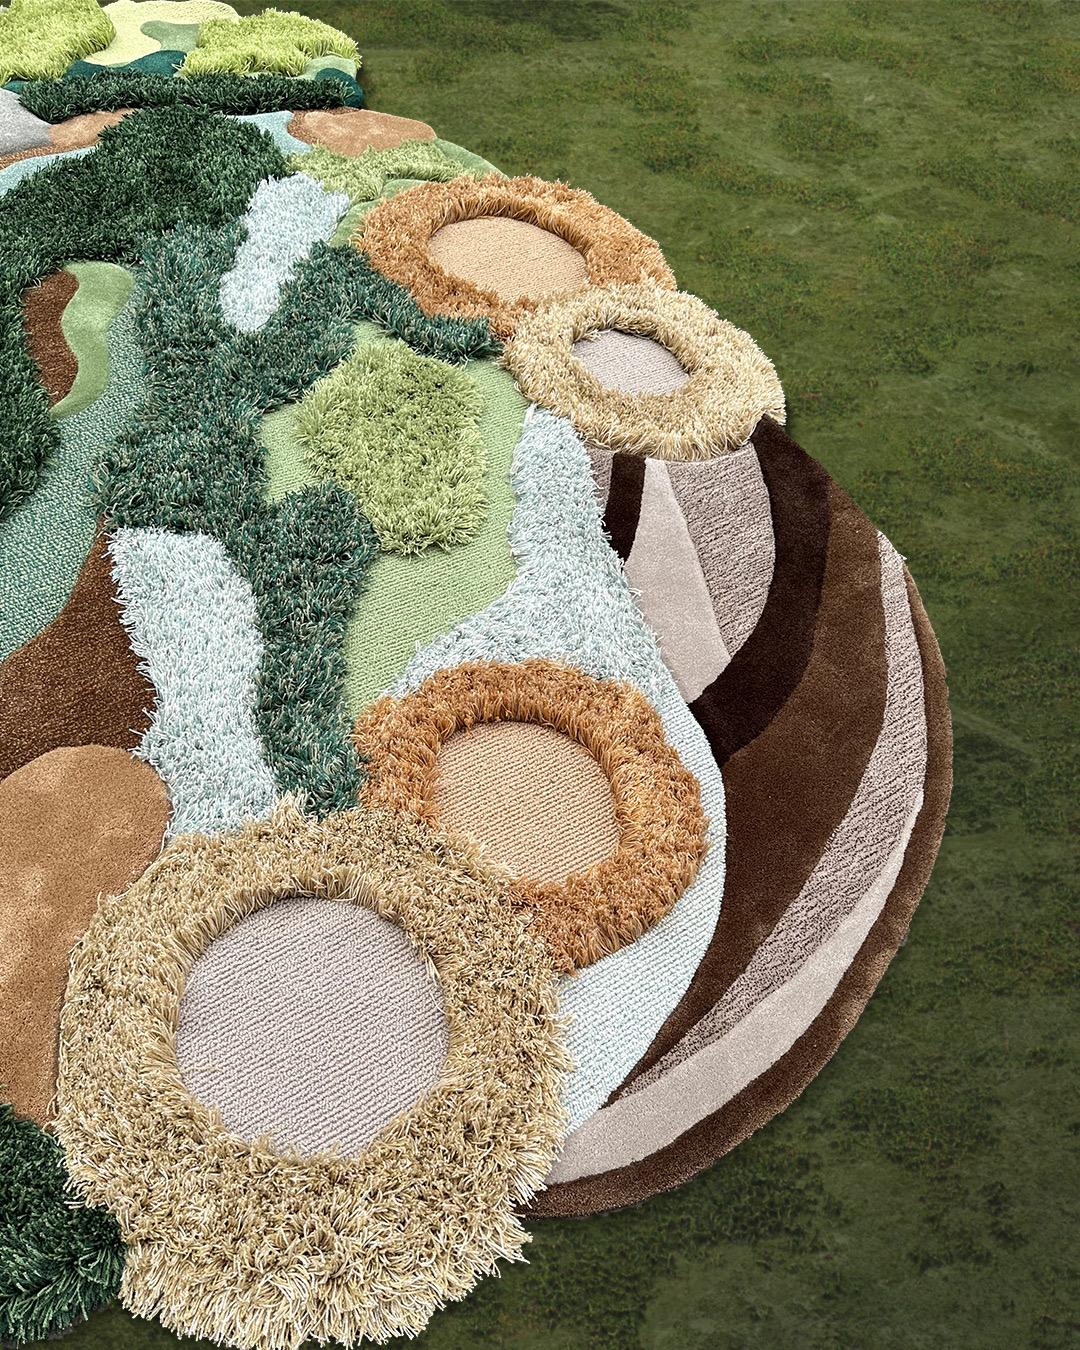 Soil, grass, bush, trees, and the tranquil crystal-clear blue ponds. Introducing ' The Earth from Above ' a sophisticated landscape rug portraying diverse golf course terrains, from lush, impeccably manicured fairways to the pristine sandy bunkers.